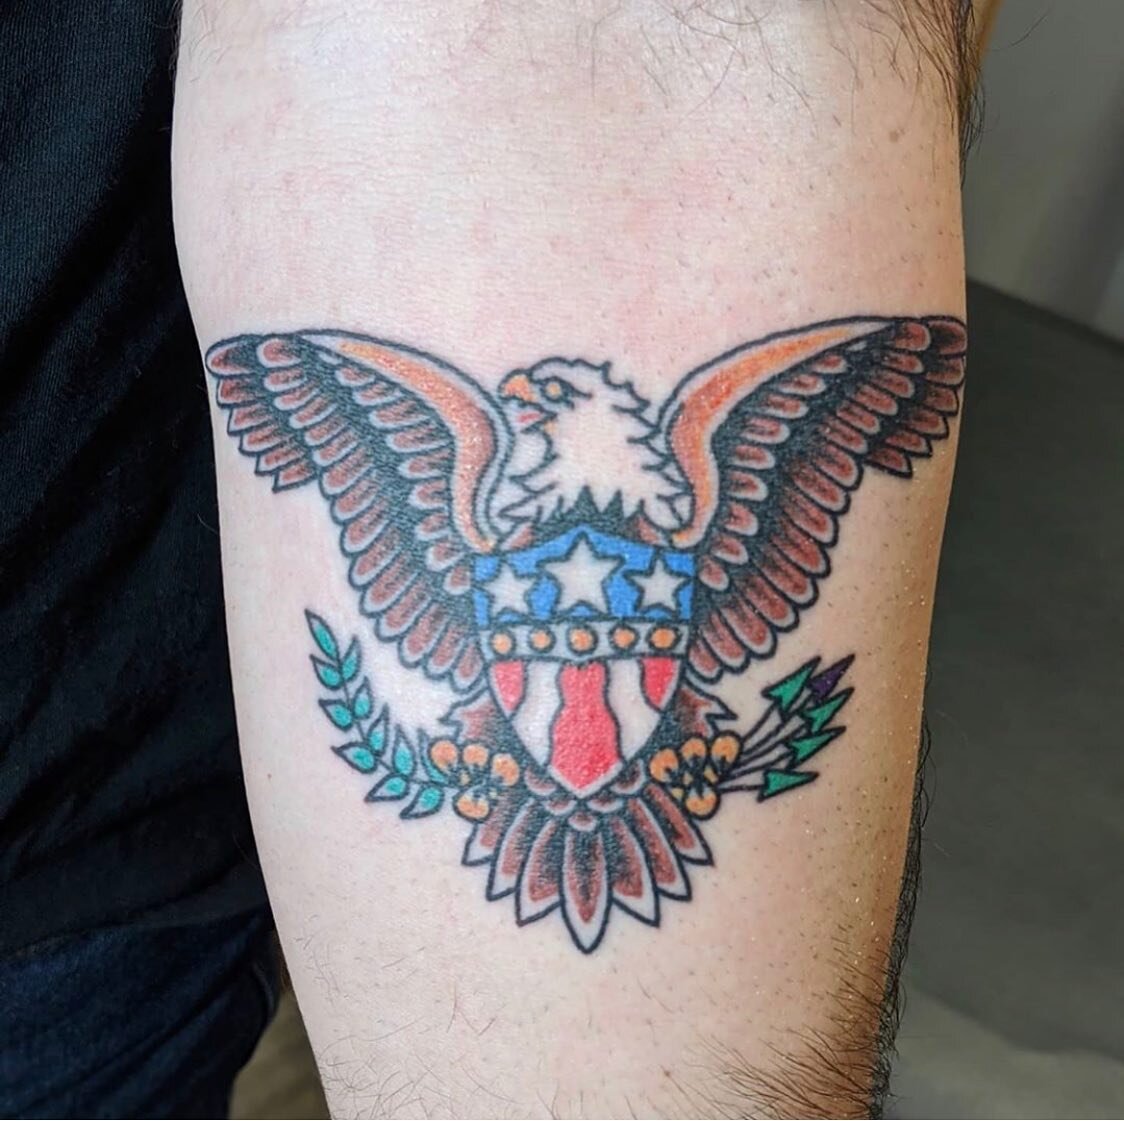 We will be CLOSED tomorrow! 

Remember to apply sunscreen over your beloved tattoos (and all over while you&rsquo;re at it!) 

Celebrate responsibly 🧨🇺🇸🦅 

Tattoo made by @bdobiastattoos 

#lrtc #lightningrevivaltattoo #lightningrevival #lightnin